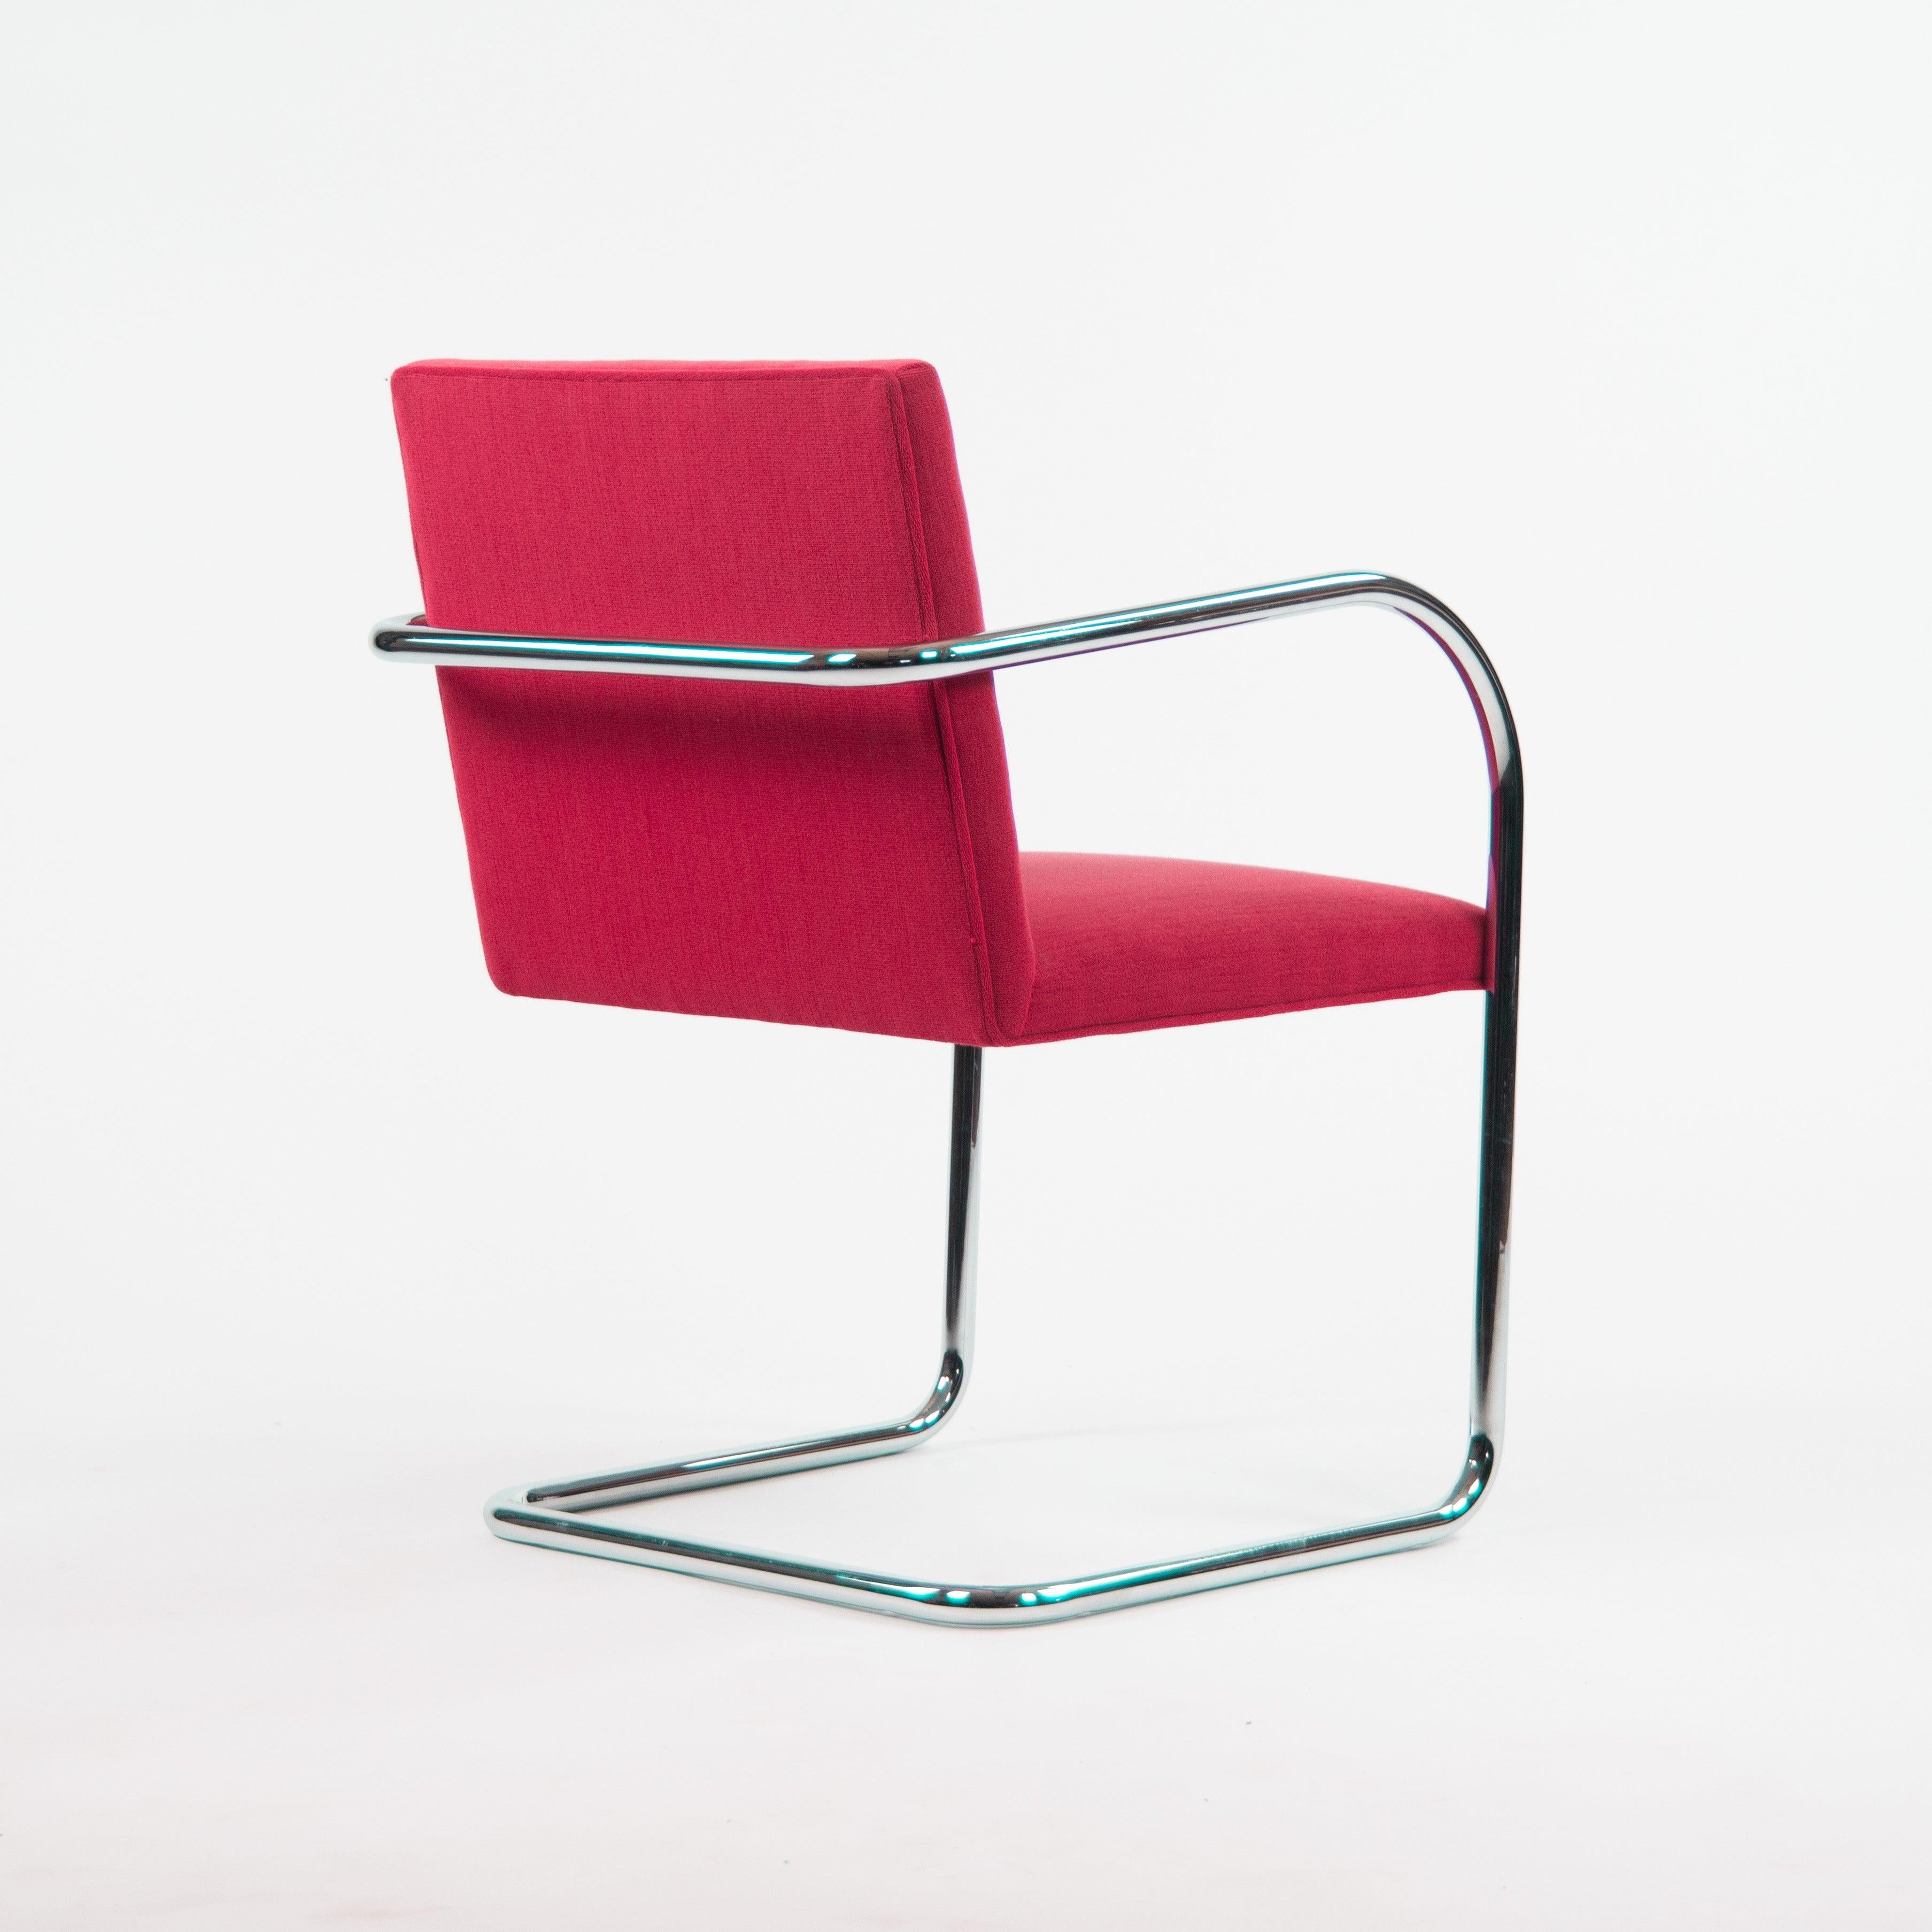 Metal 2010 Mies van der Rohe for Knoll Brno Tubular Chrome Dining / Arm Chairs For Sale